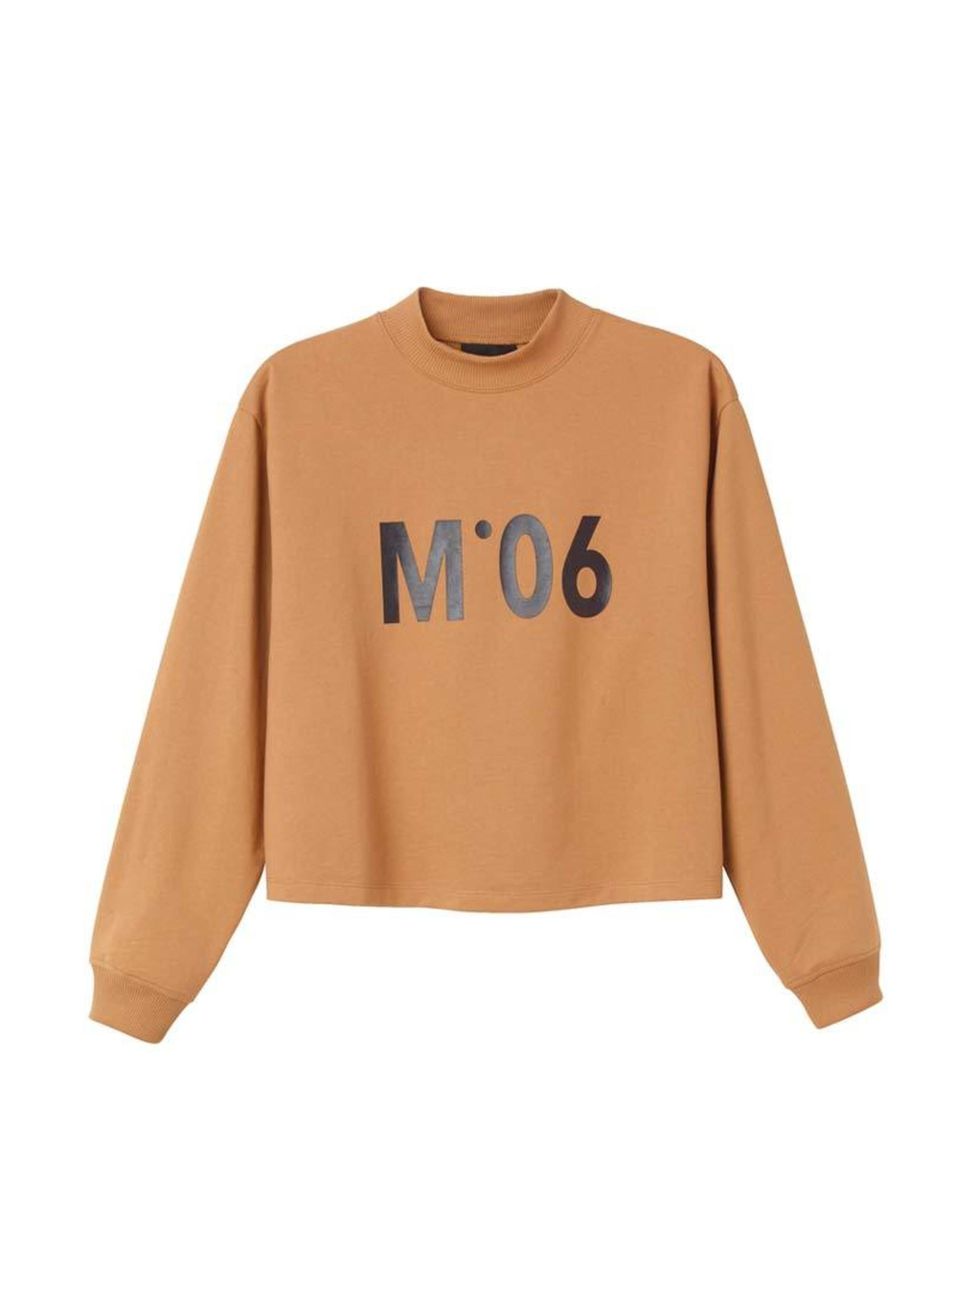 <p>The sweatshirt's latest incarnation is boxy and slightly cropped. </p>

<p> </p>

<p><a href="http://www.monki.com/View_all_new/Ebba_sweat/8668818-8172885.1#c-47958" target="_blank">Monki</a> sweatshirt, £25</p>